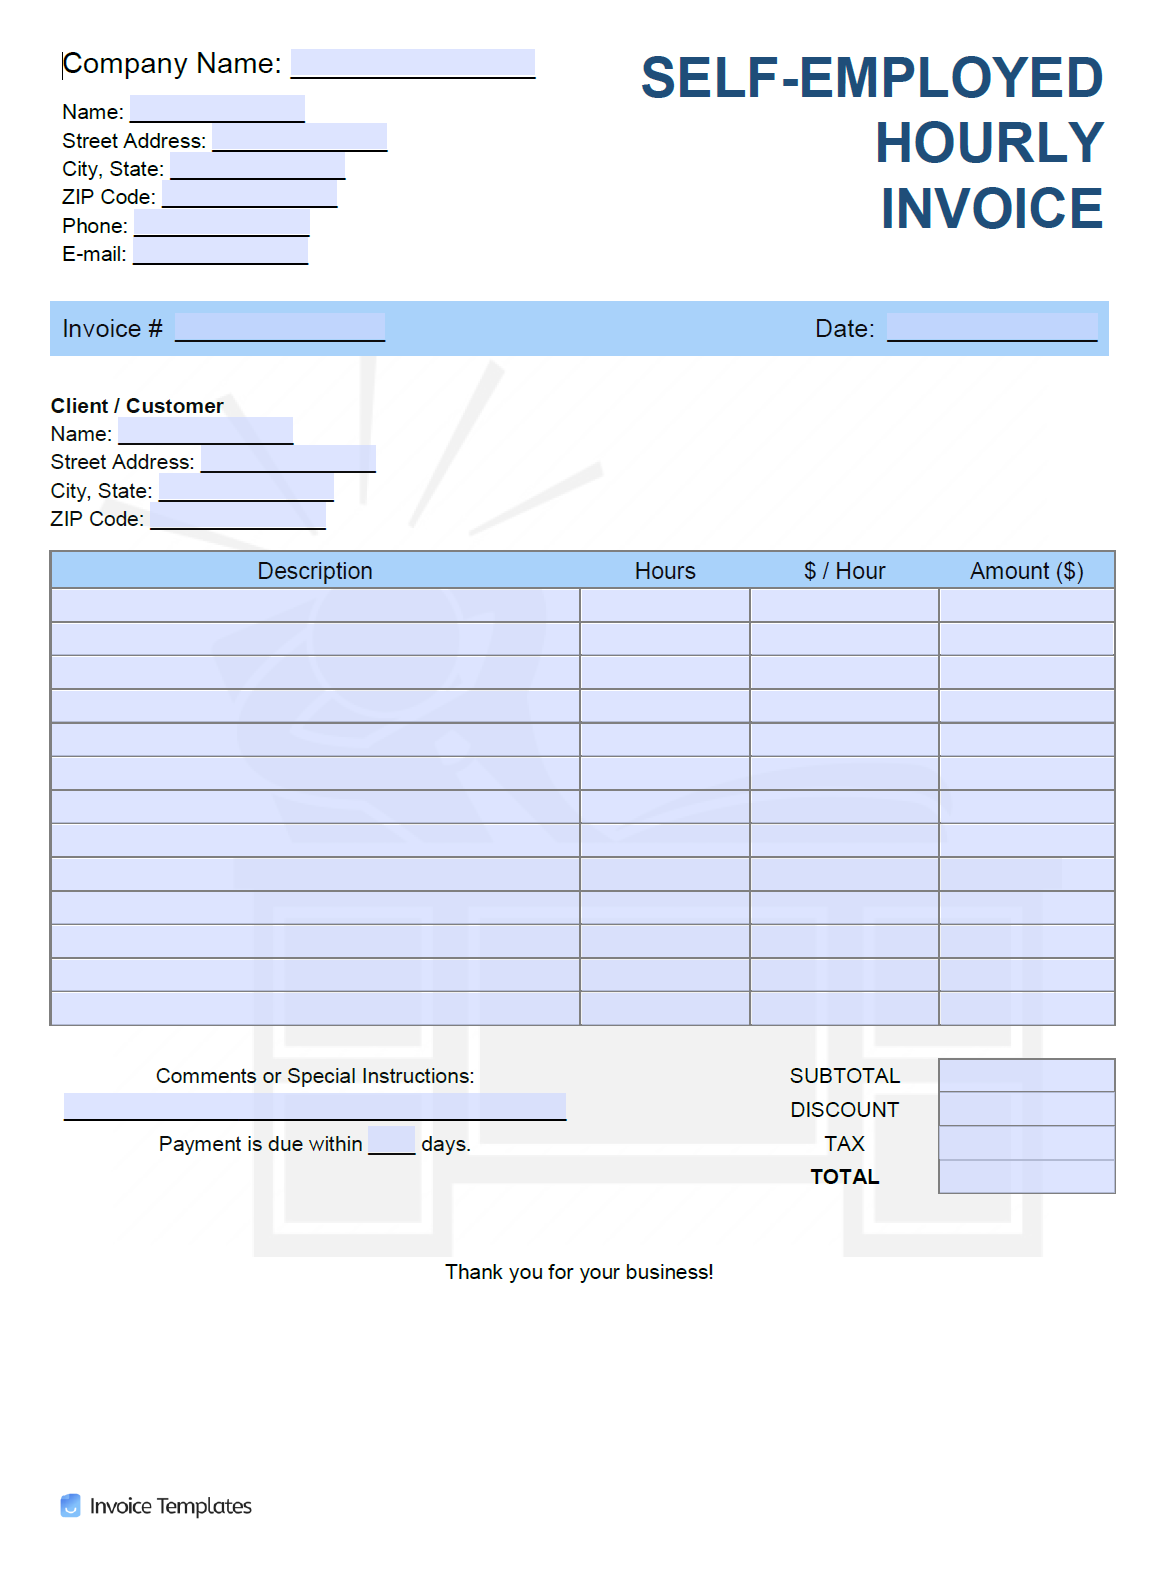 How To Make An Invoice Self Employed Uk